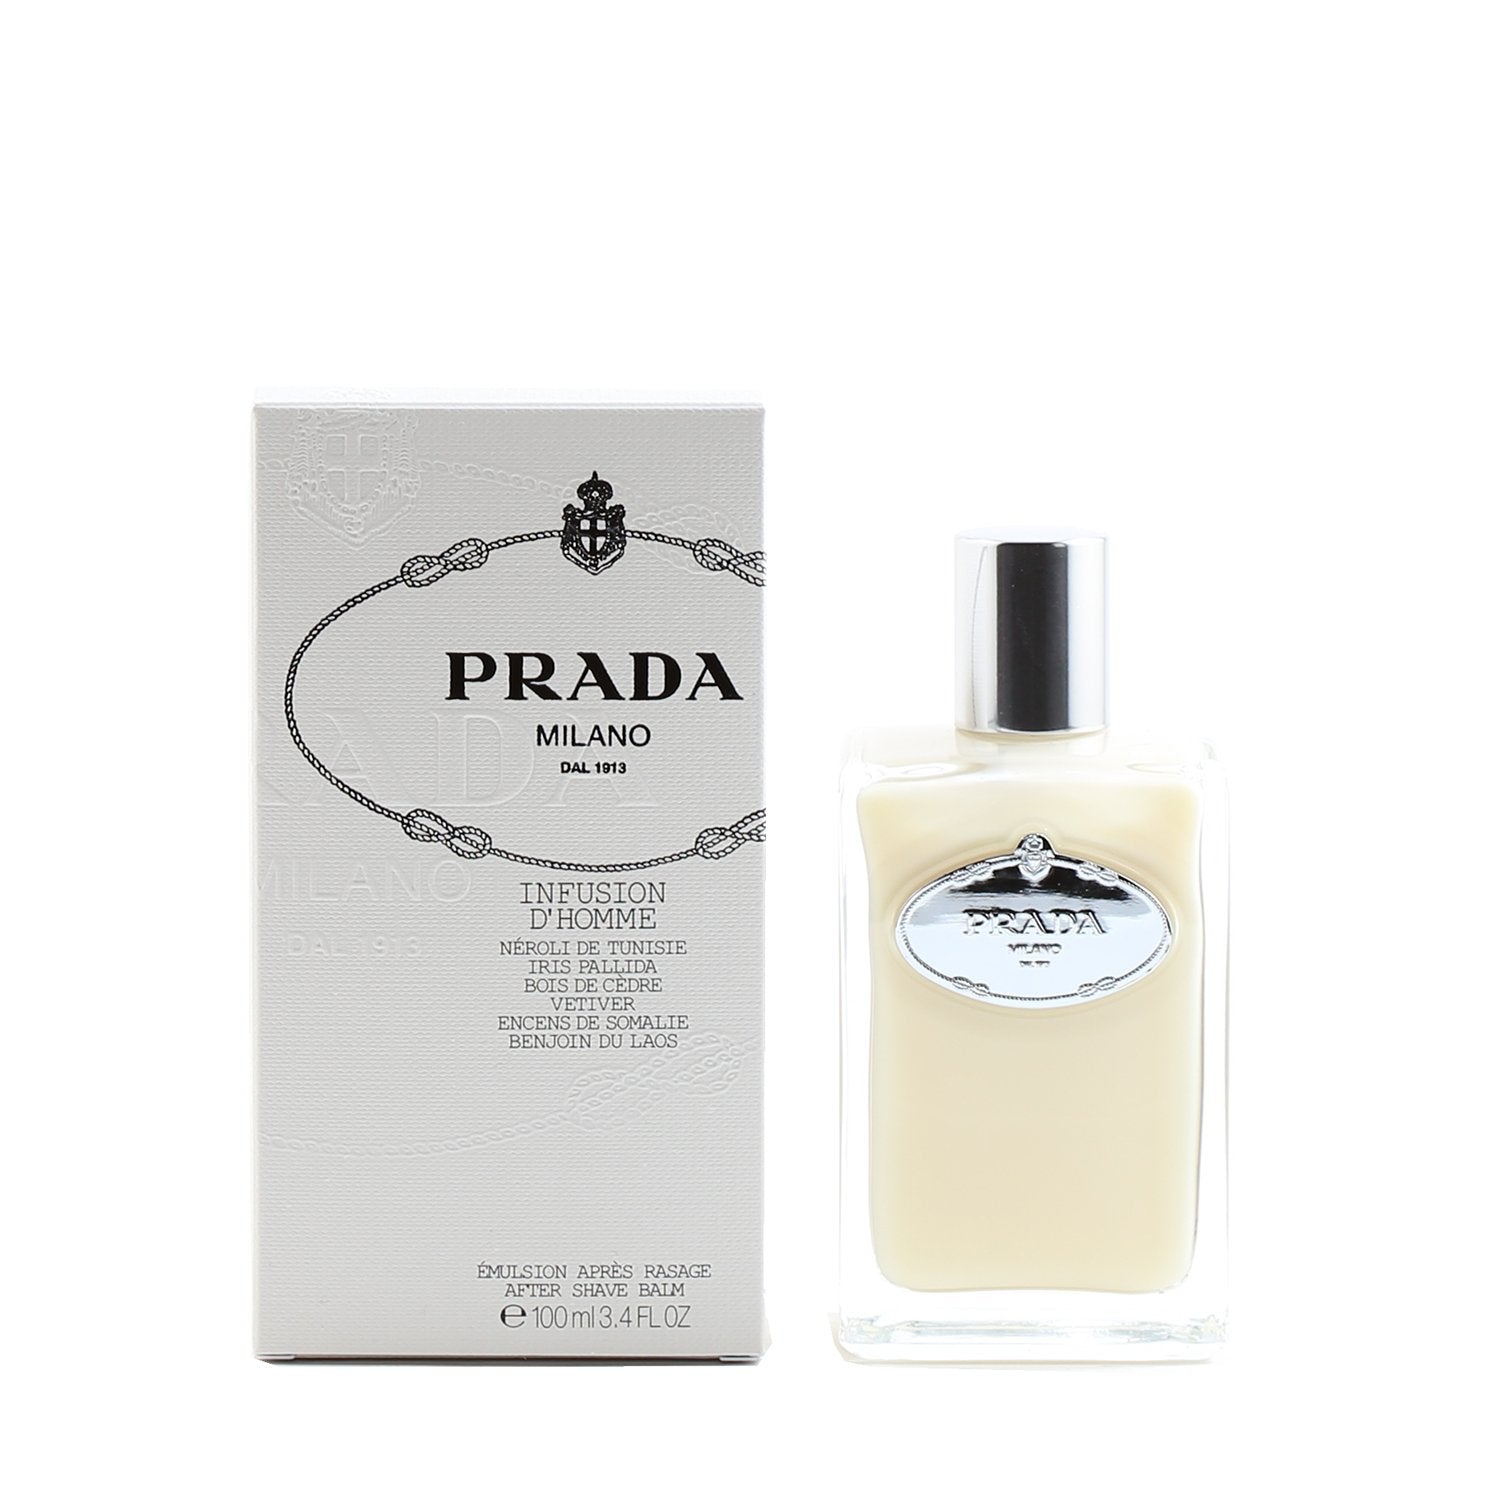 Cologne - PRADA INFUSION D'HOMME - AFTER SHAVE BALM, 3.4 OZ.